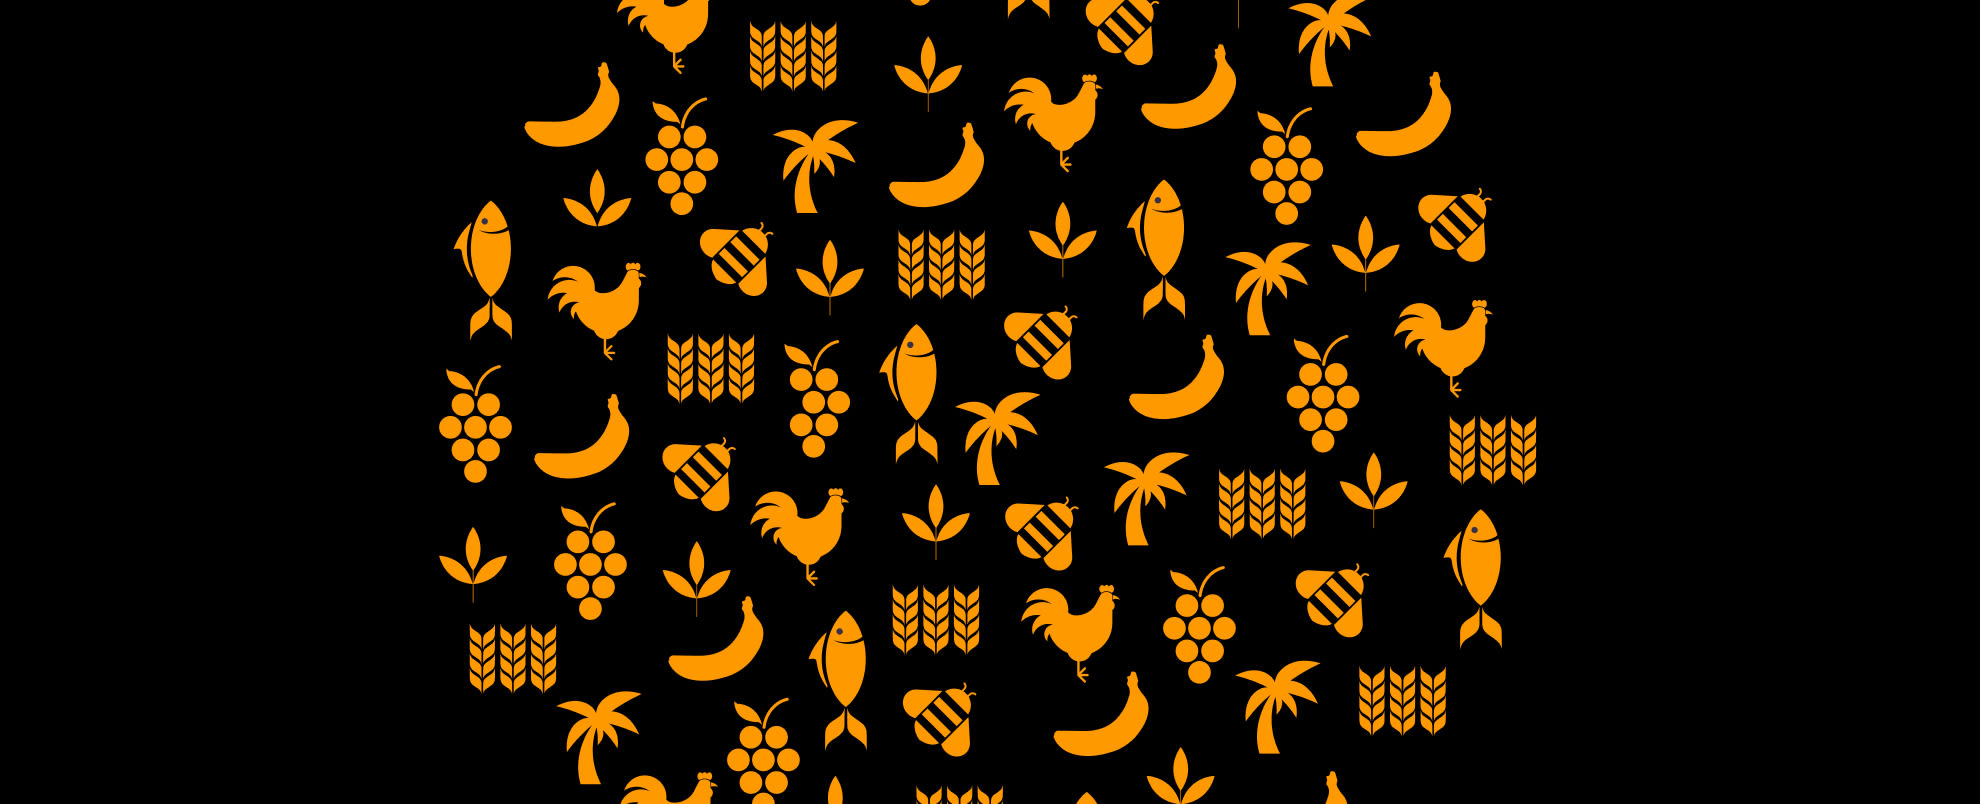 A collection of food icons in orange such as plants. grapes, bananas, chicken, and corn